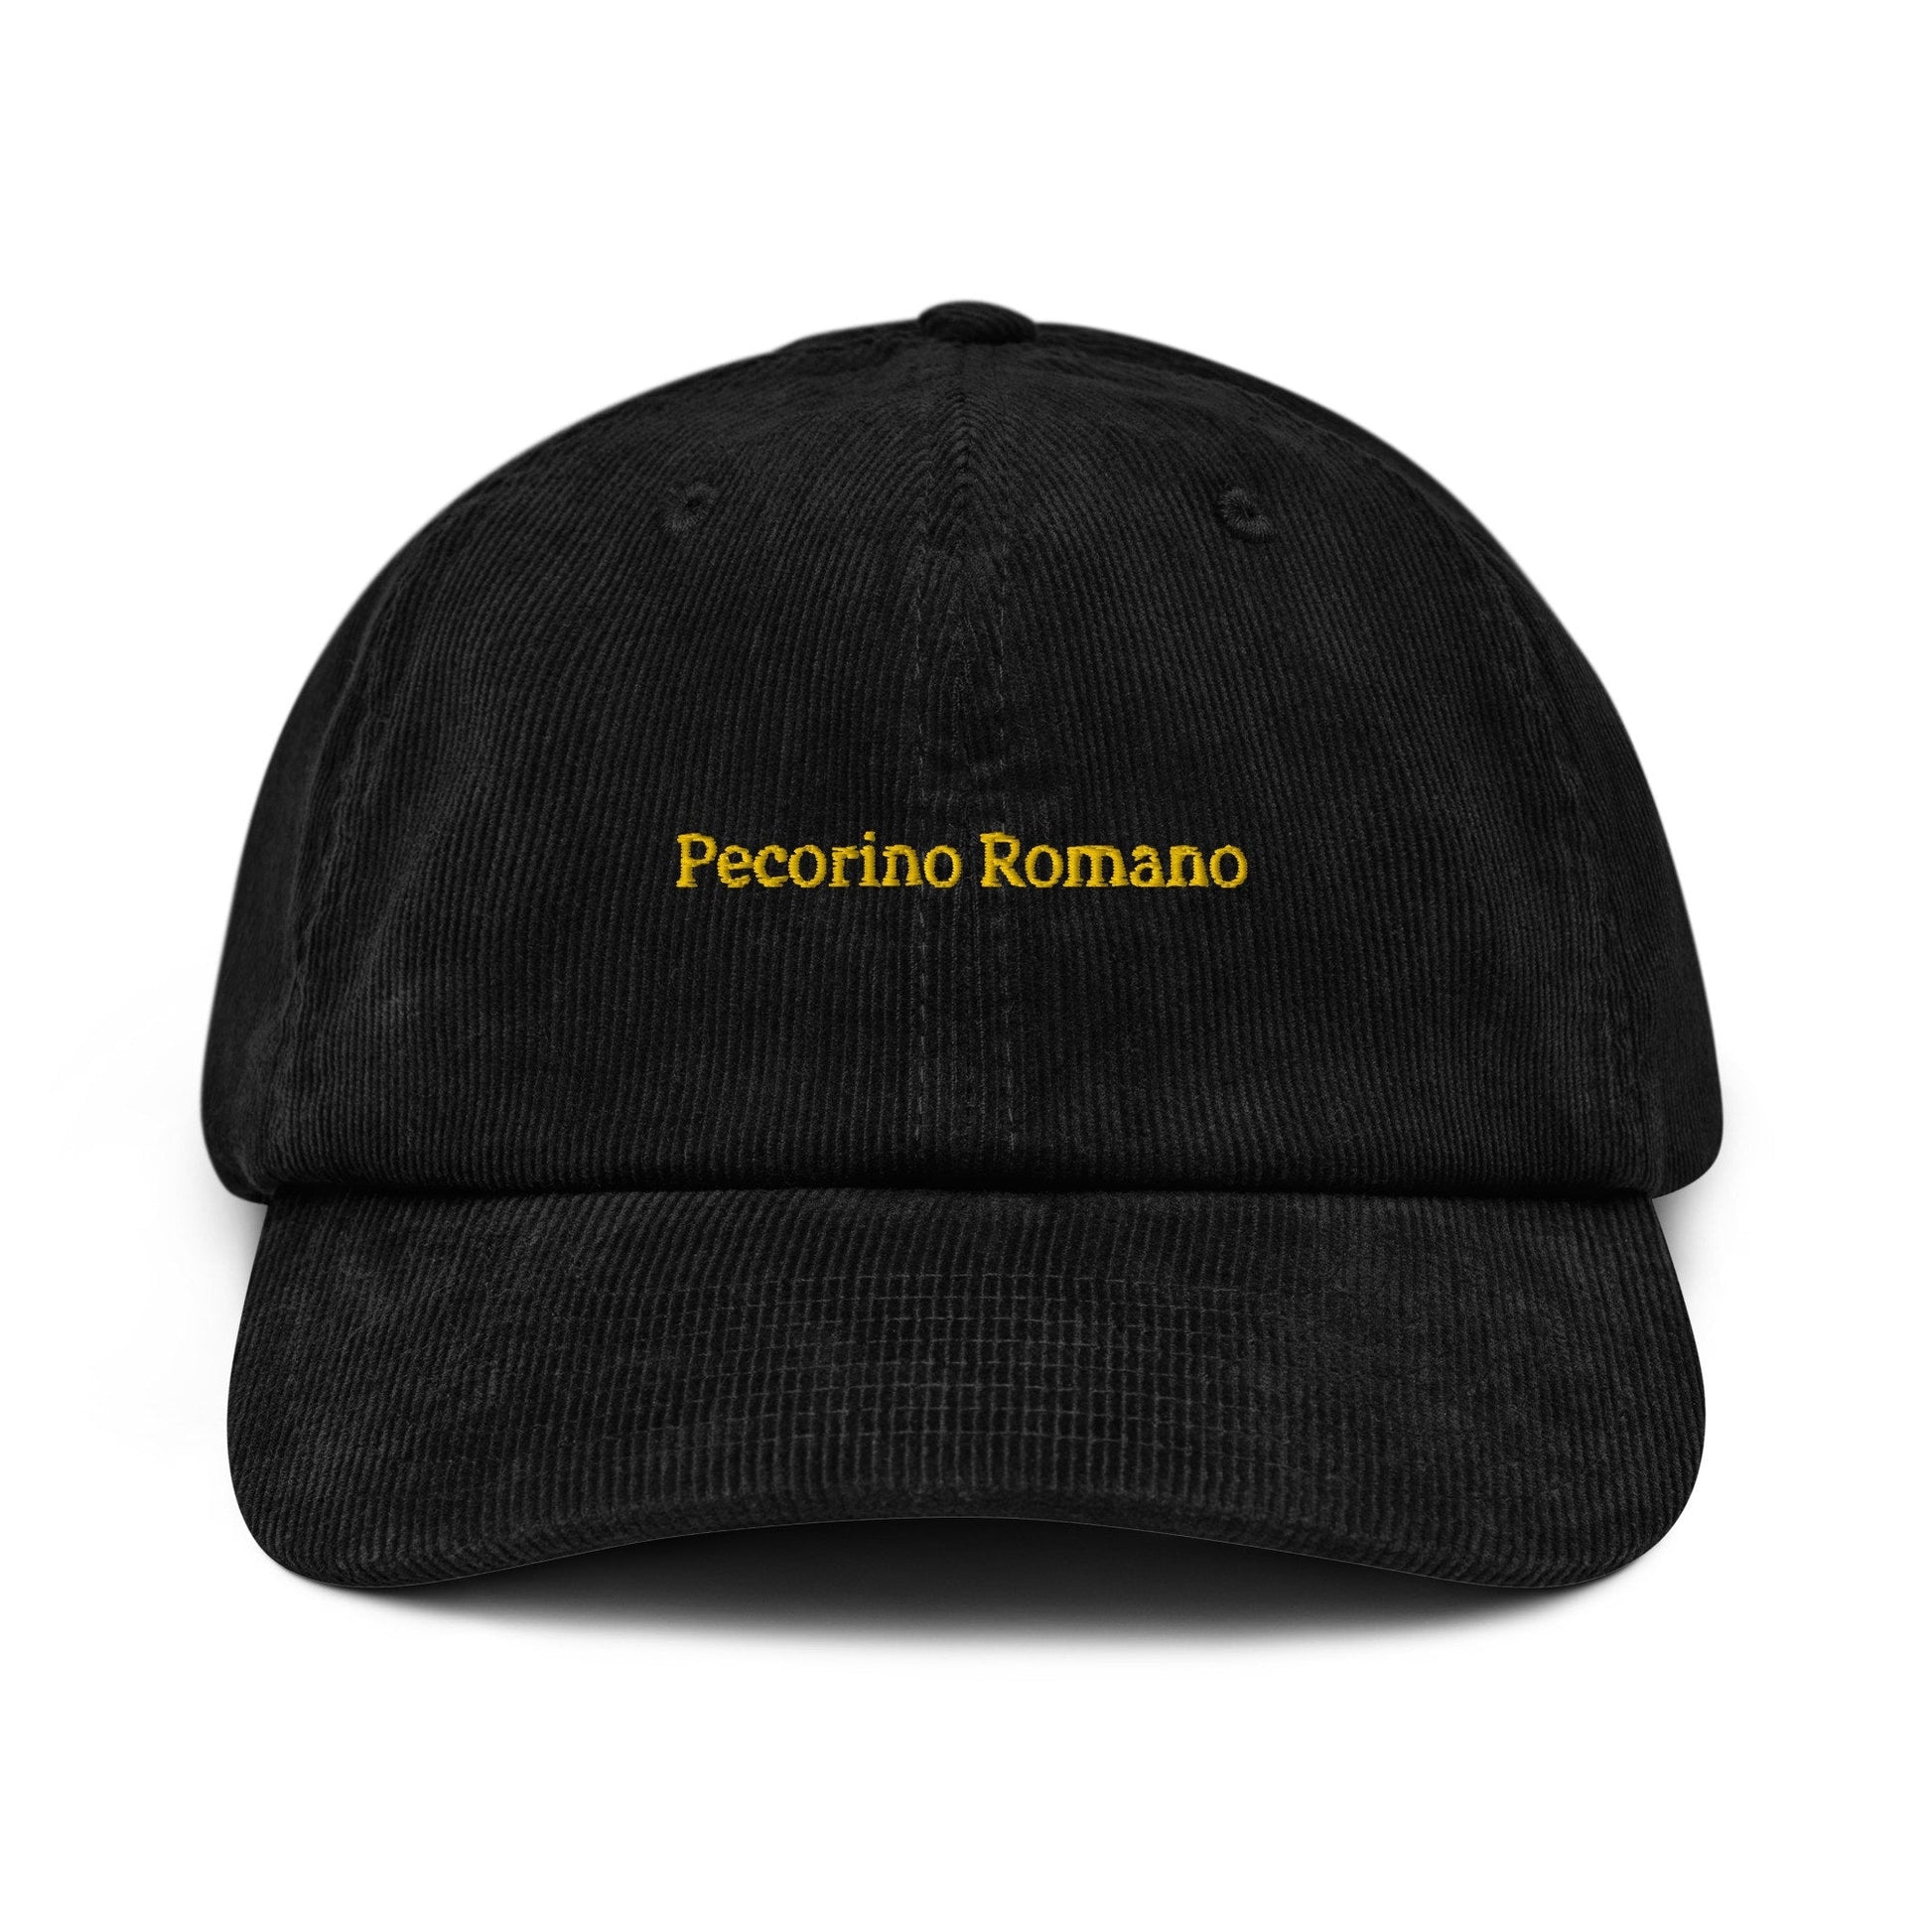 Pecorino Romano Corduroy Dad Hat - Gift for Italian charcuterie and cheese food Lovers - Handmade Embroidered Cap - Evilwater Originals